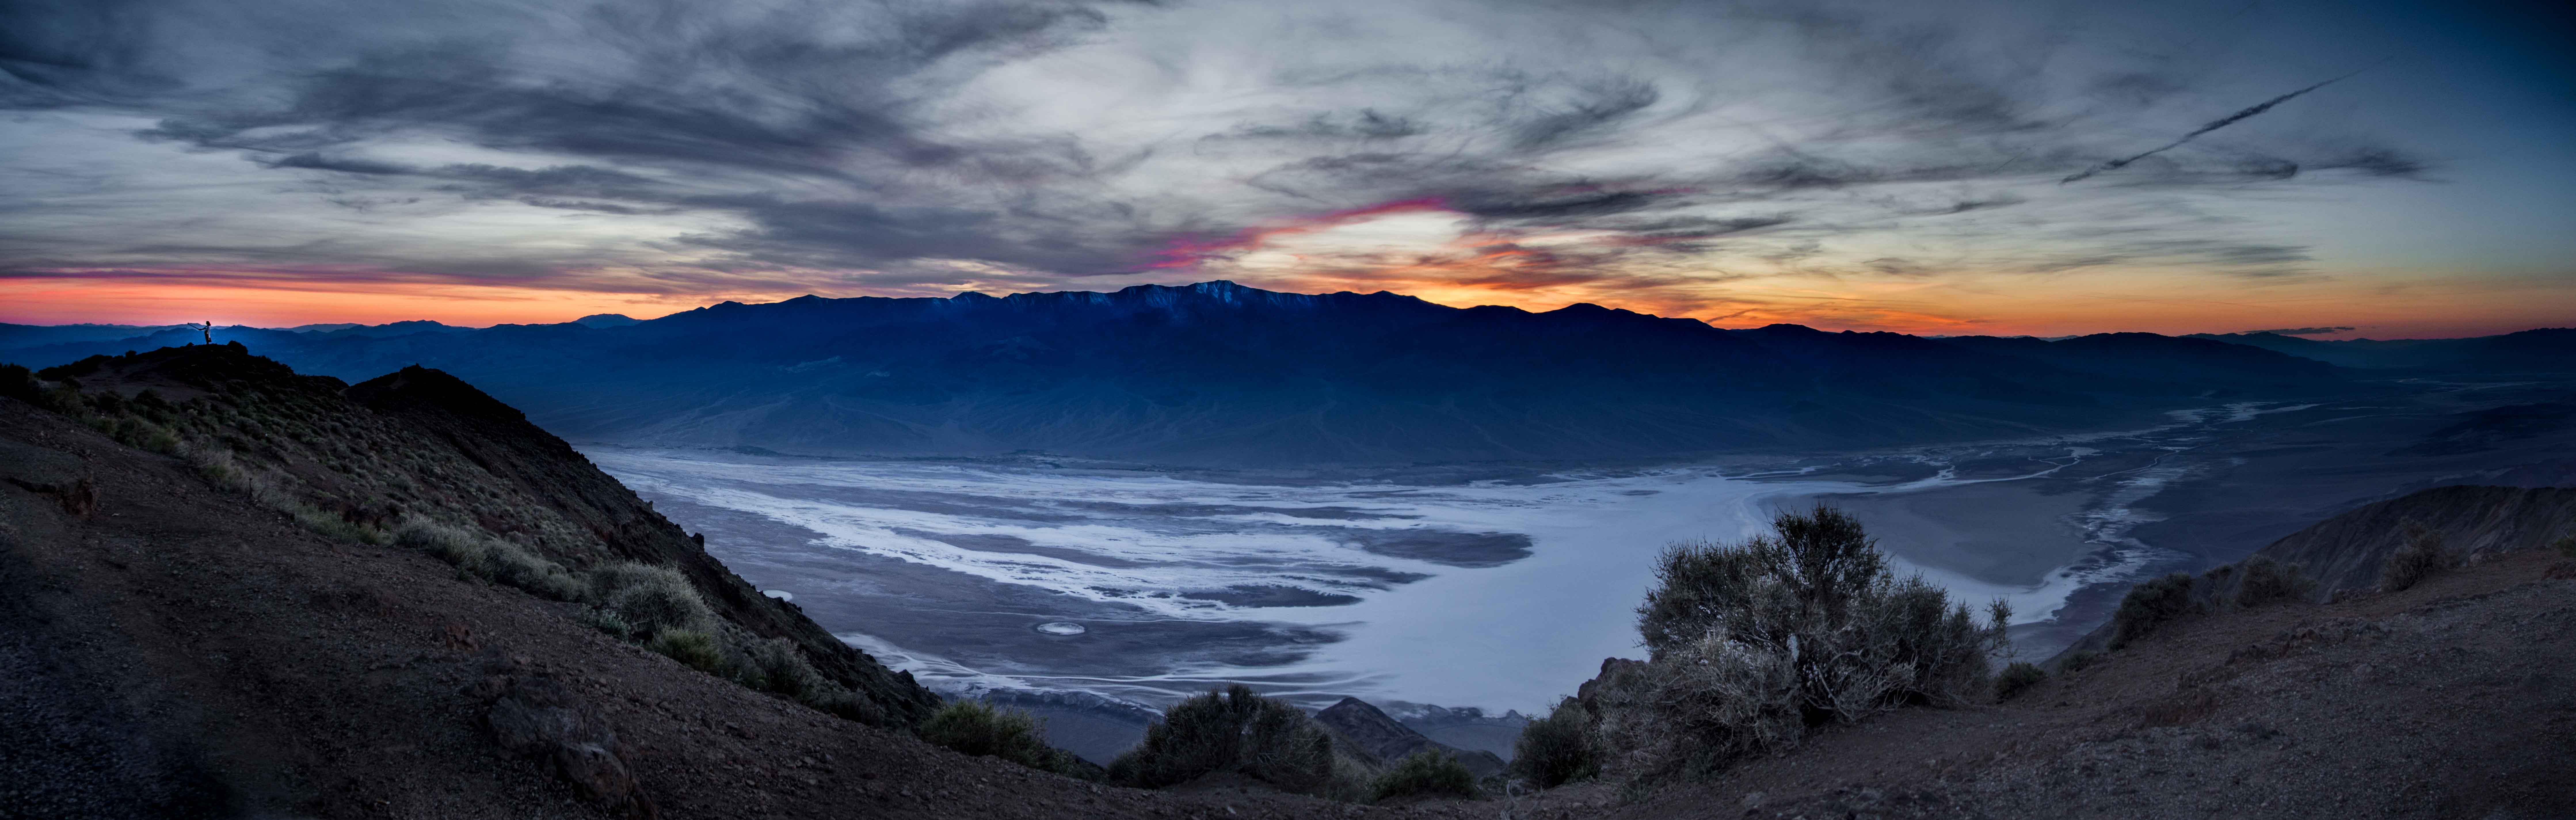 A panorama of a sunset's last breath over the salt flats of Death Valley.